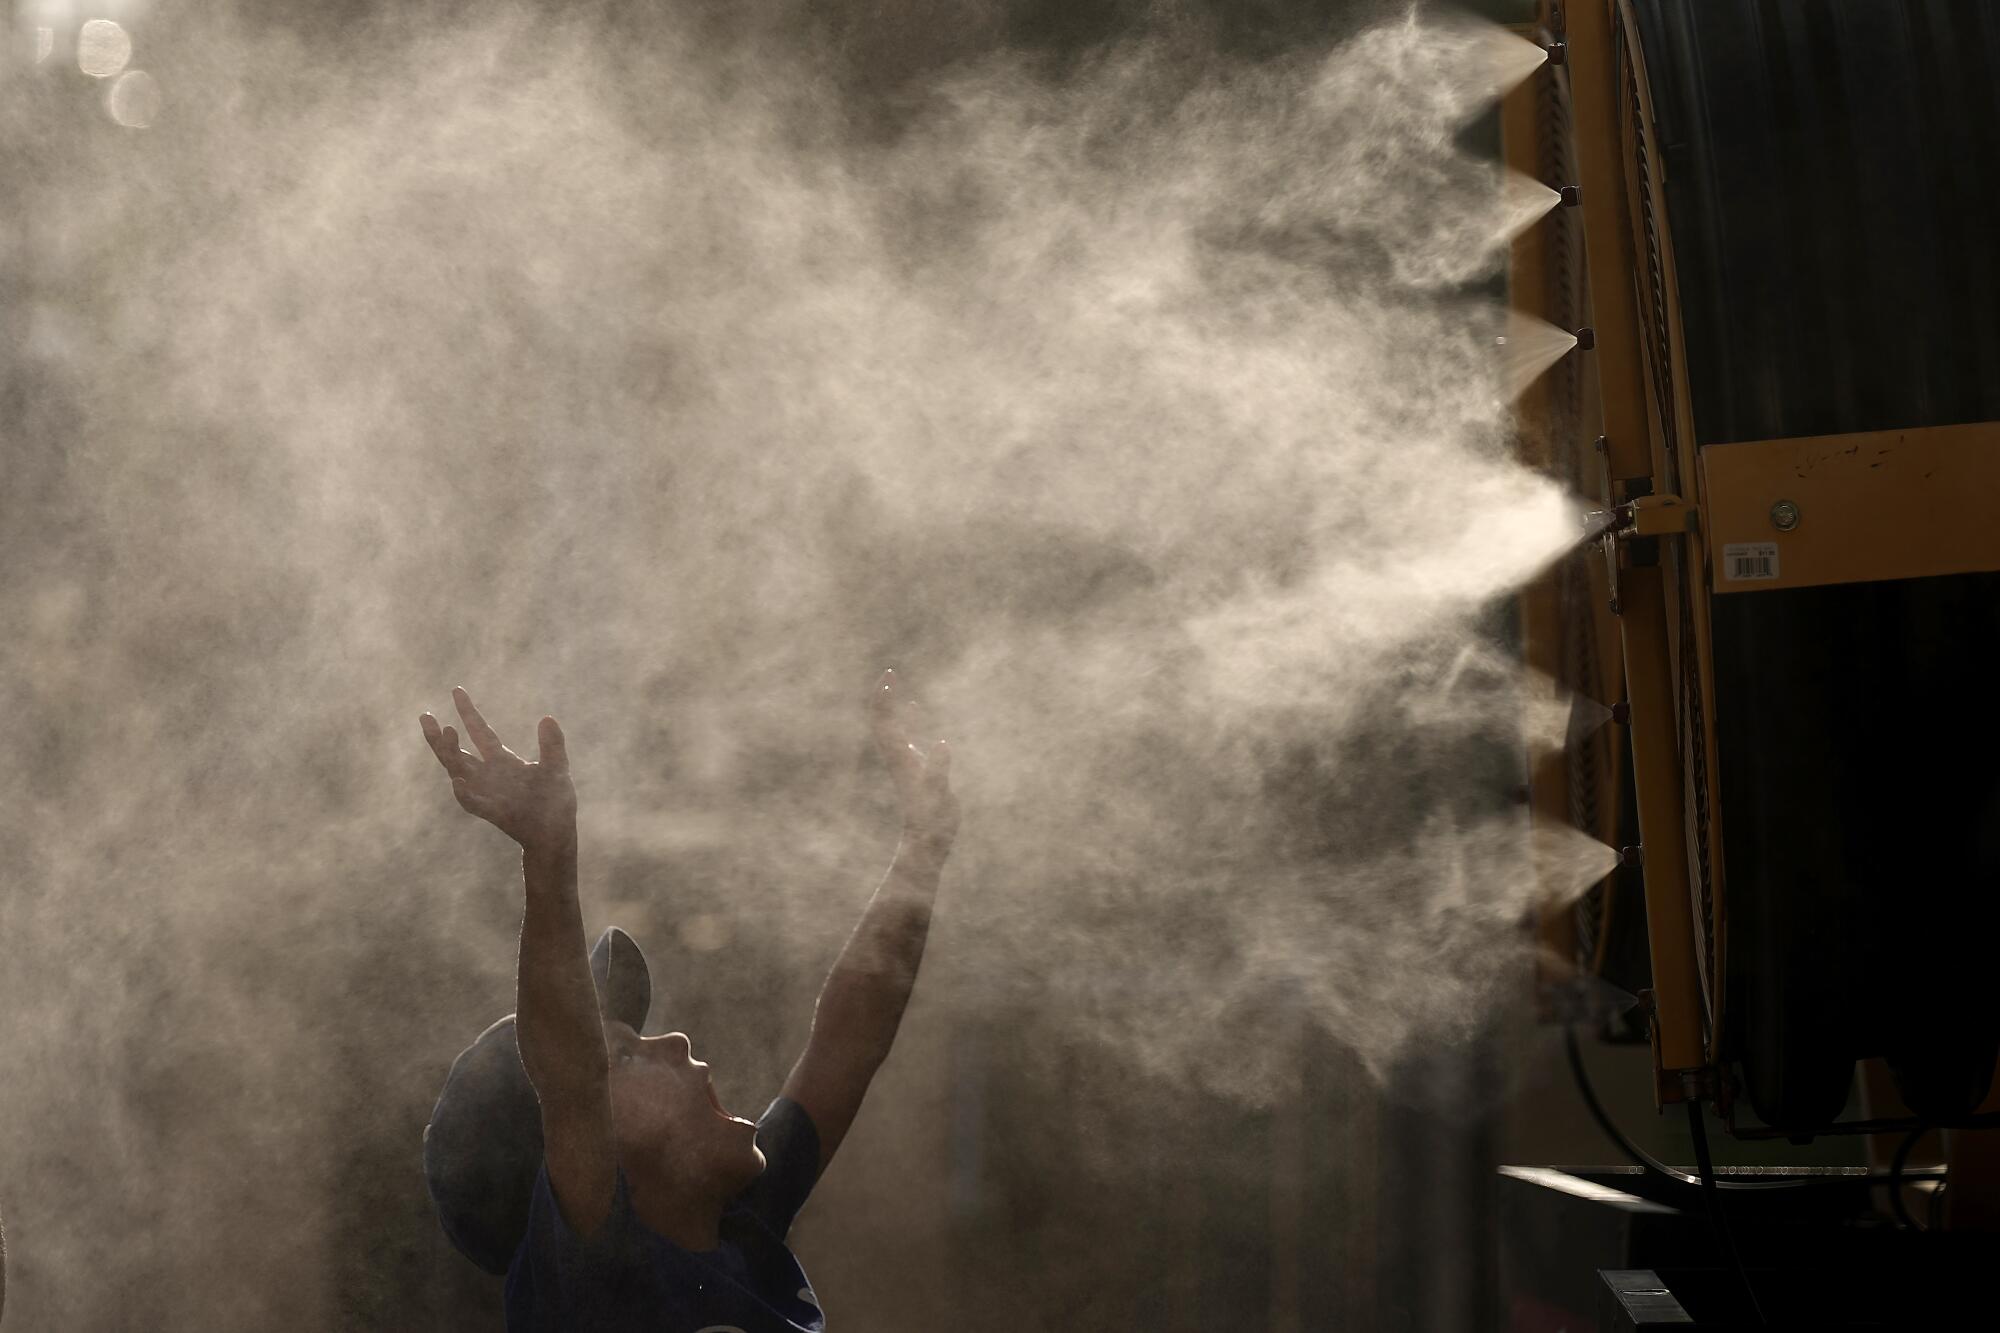 A young boy raises his hands and opens his mouth as mist sprays from a series of nozzles.